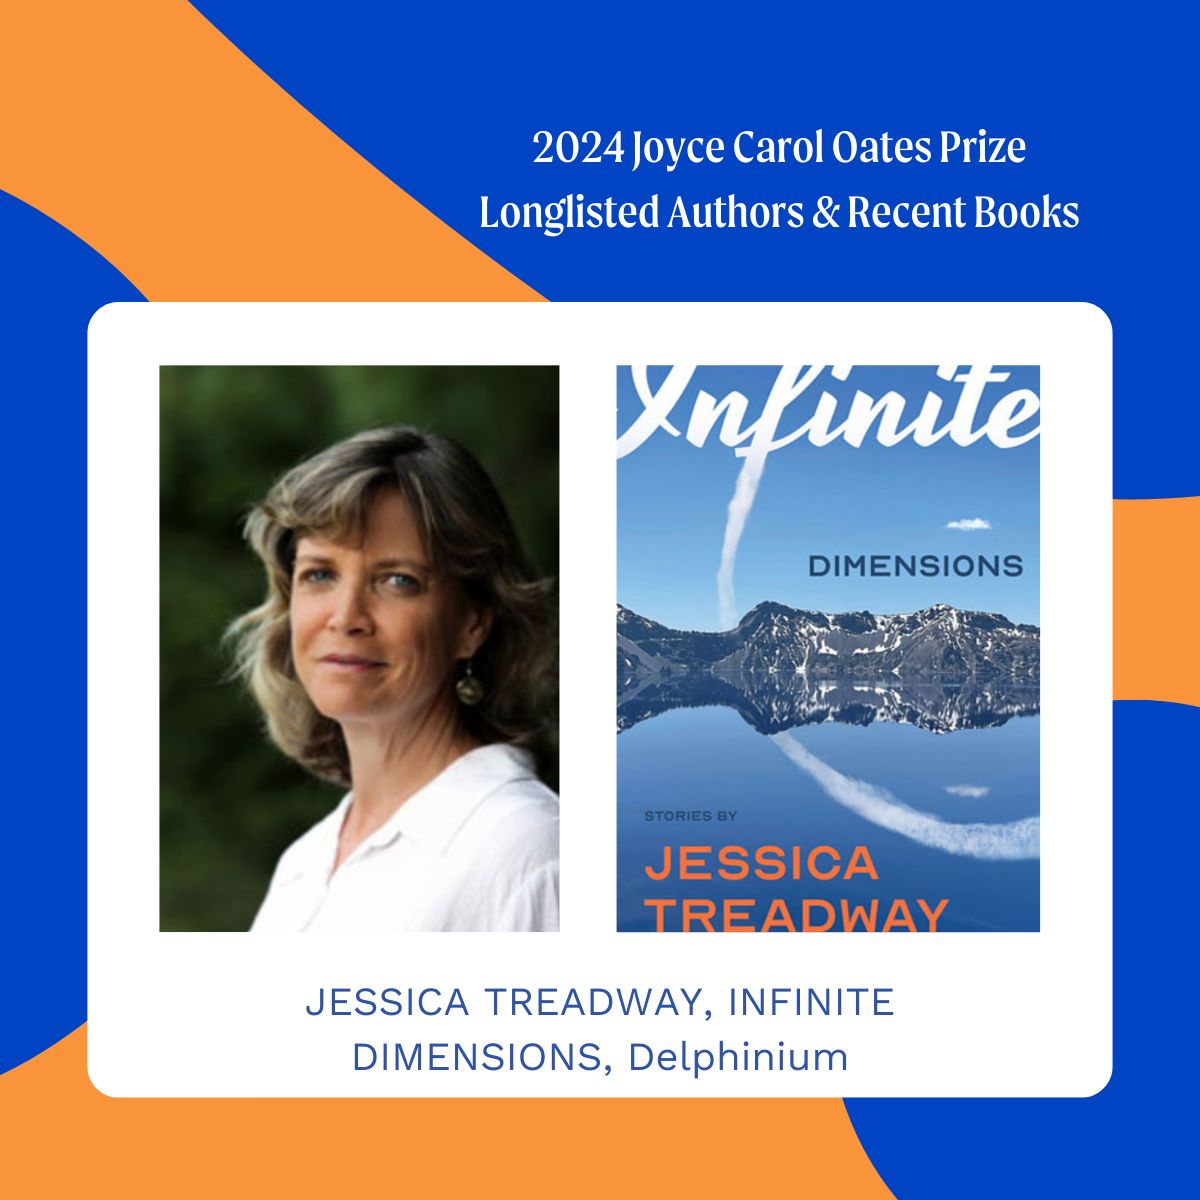 Cobgratulations to Jessica Treadway on being Longlisted for the 2024 JCO Prize. Kirkus Reviews writes 'Treadway will leave readers reflecting on choices we’ve made that have set us on our current paths ...Thought-provoking and engaging.'